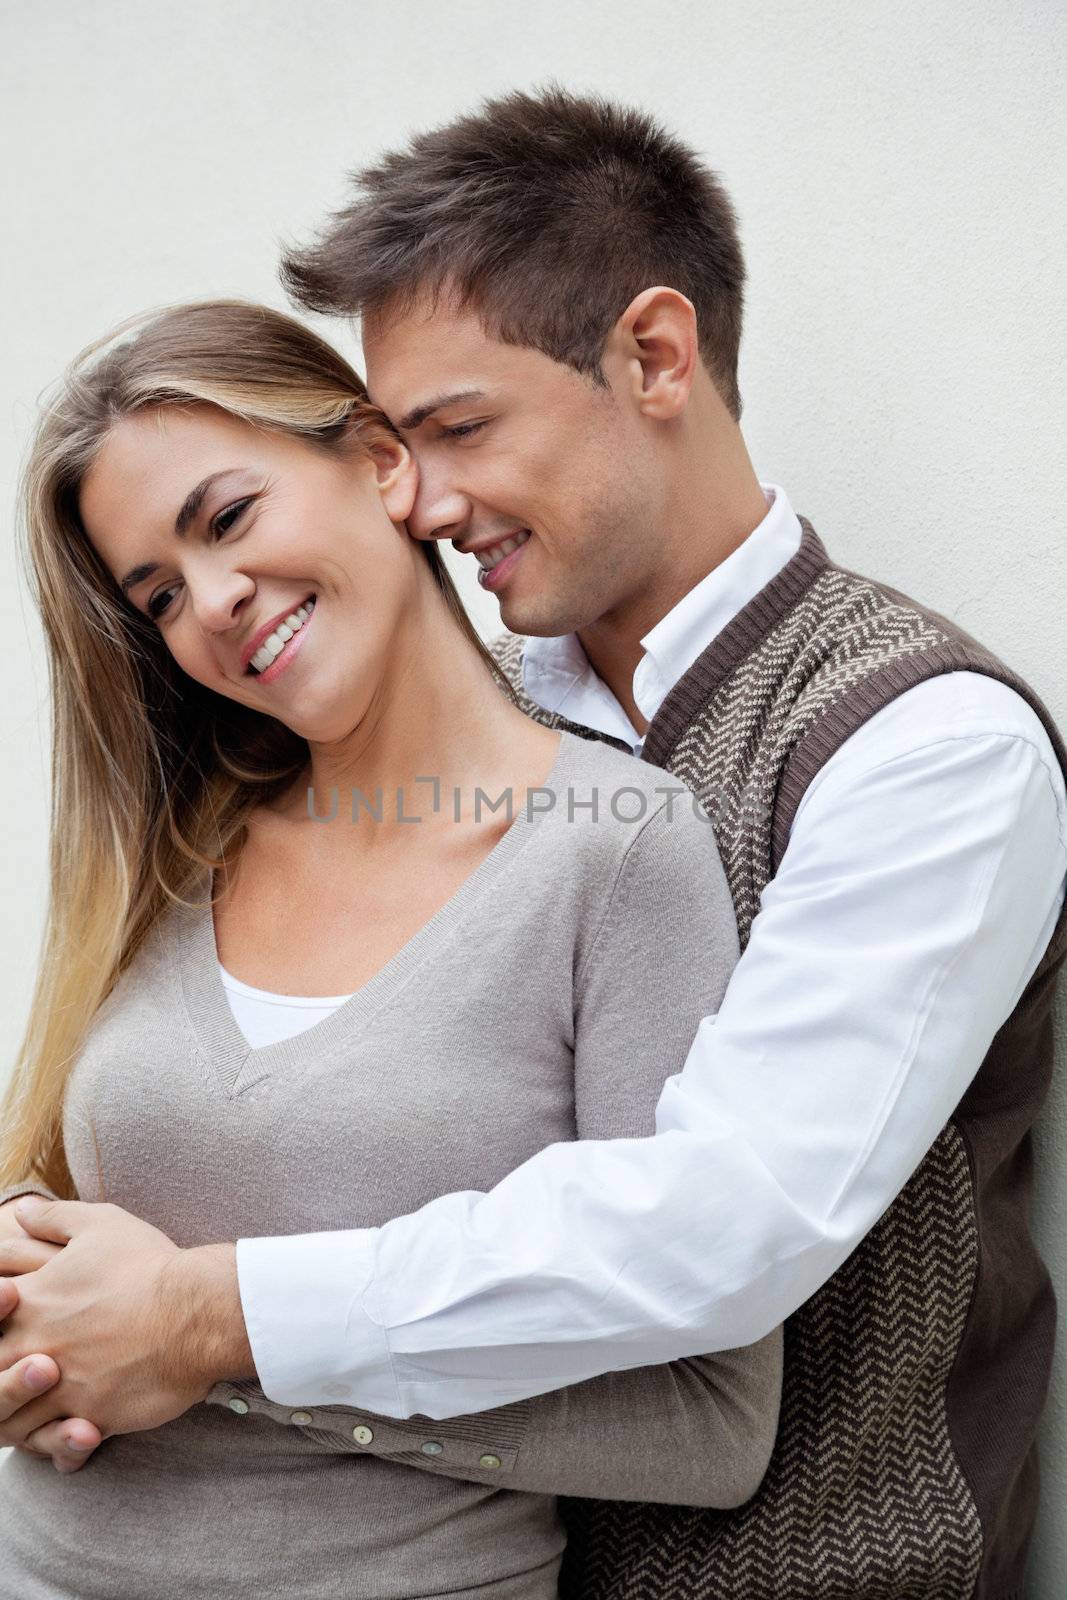 Young man embracing a beautiful woman from behind over colored background